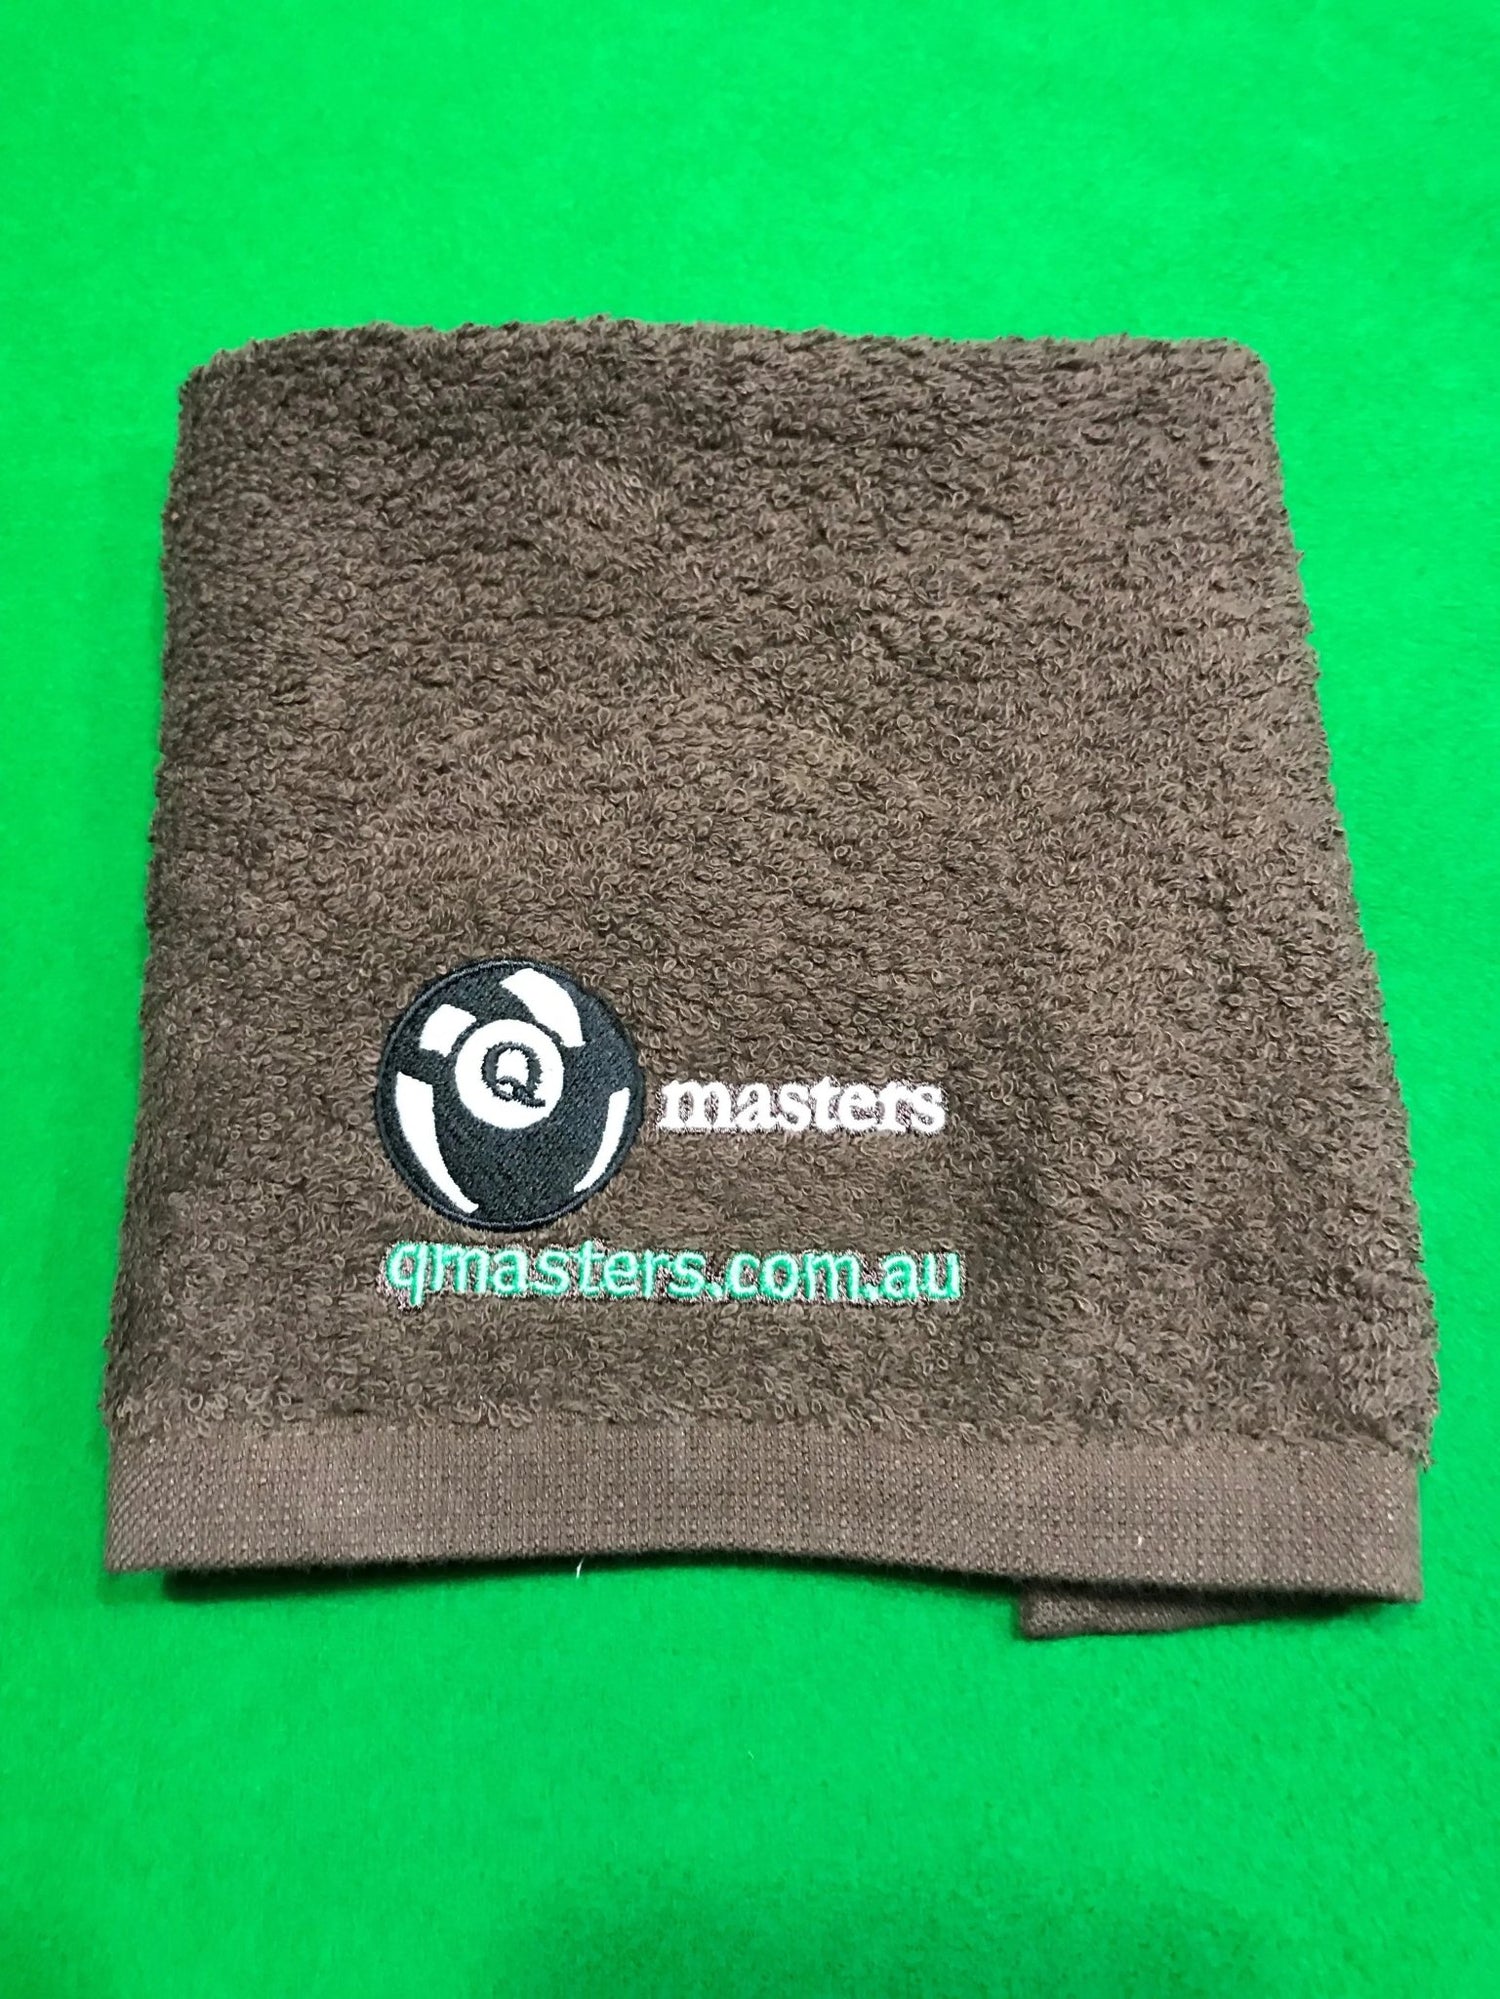 Q-Masters Embroidered Cue Sport Towel Brown - Q-Masters